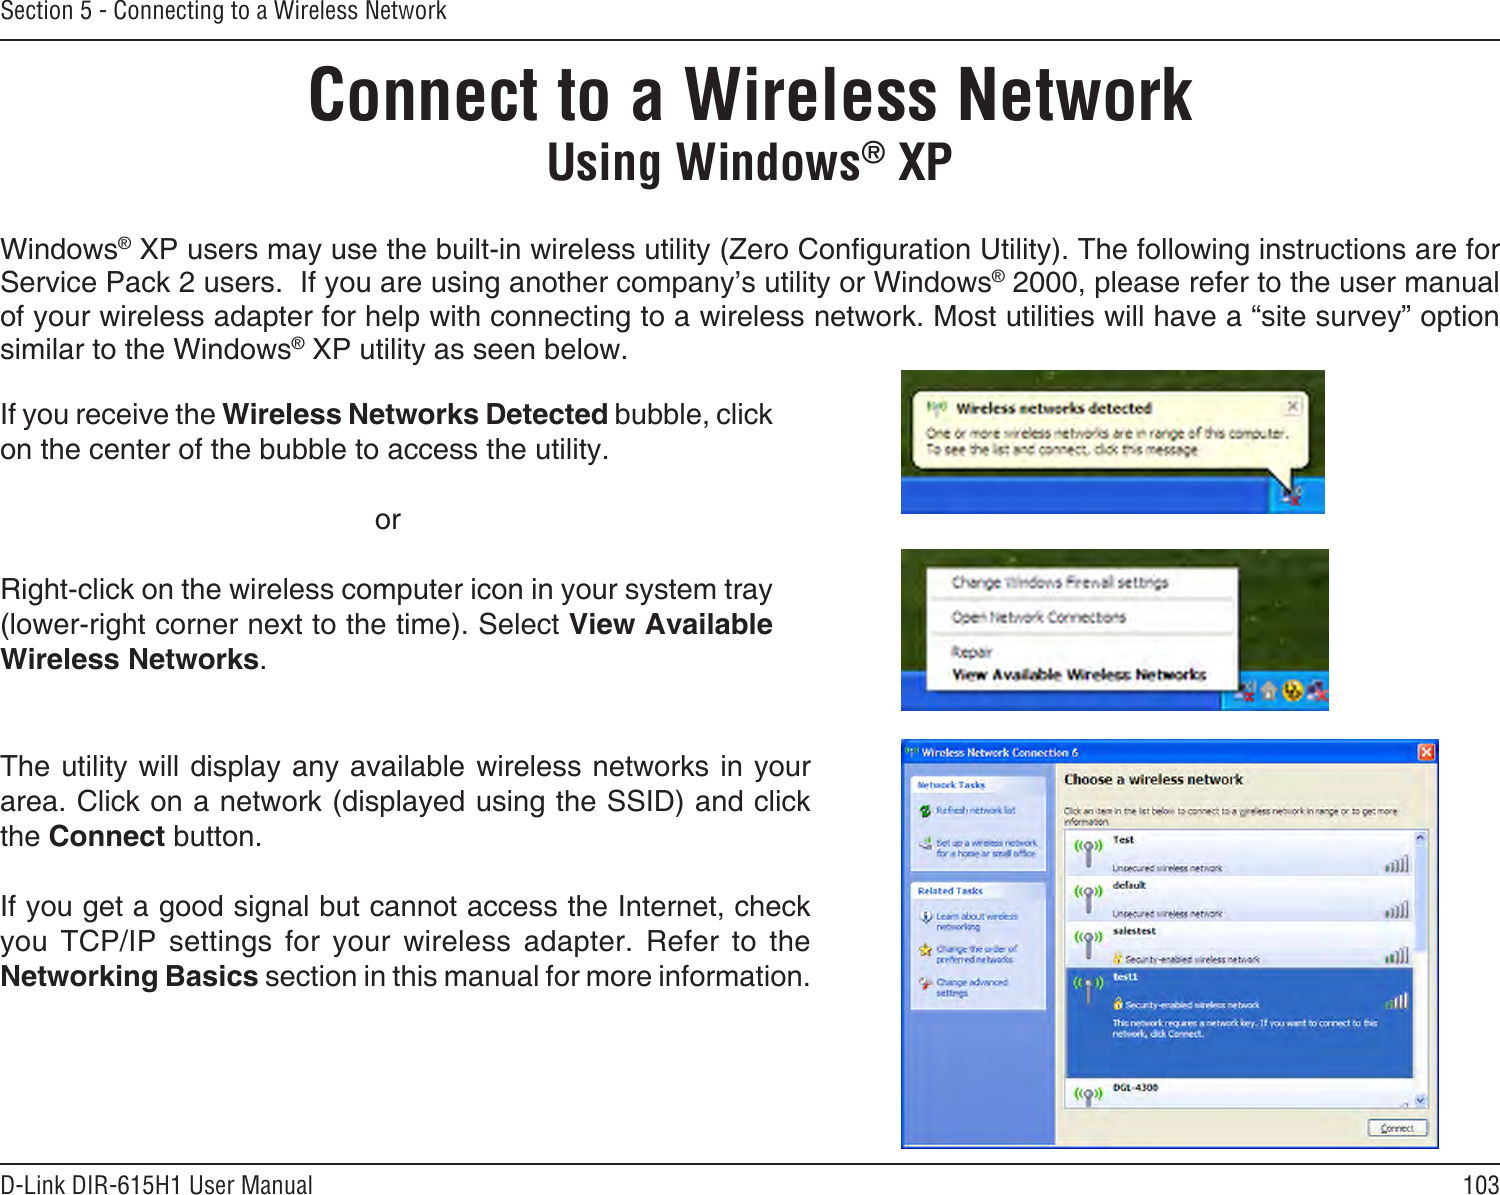 103D-Link DIR-615H1 User ManualSection 5 - Connecting to a Wireless NetworkWindows® XP users may use the built-in wireless utility (Zero Conguration Utility). The following instructions are for Service Pack 2 users.  If you are using another company’s utility or Windows® 2000, please refer to the user manual of your wireless adapter for help with connecting to a wireless network. Most utilities will have a “site survey” option similar to the Windows® XP utility as seen below.If you receive the Wireless Networks Detected bubble, click on the center of the bubble to access the utility.     orRight-click on the wireless computer icon in your system tray (lower-right corner next to the time). Select View Available Wireless Networks.The utility will display any available wireless networks in your area. Click on a network (displayed using the SSID) and click the Connect button.If you get a good signal but cannot access the Internet, check you  TCP/IP  settings  for  your  wireless  adapter.  Refer  to  the Networking Basics section in this manual for more information.Connect to a Wireless NetworkUsing Windows® XP